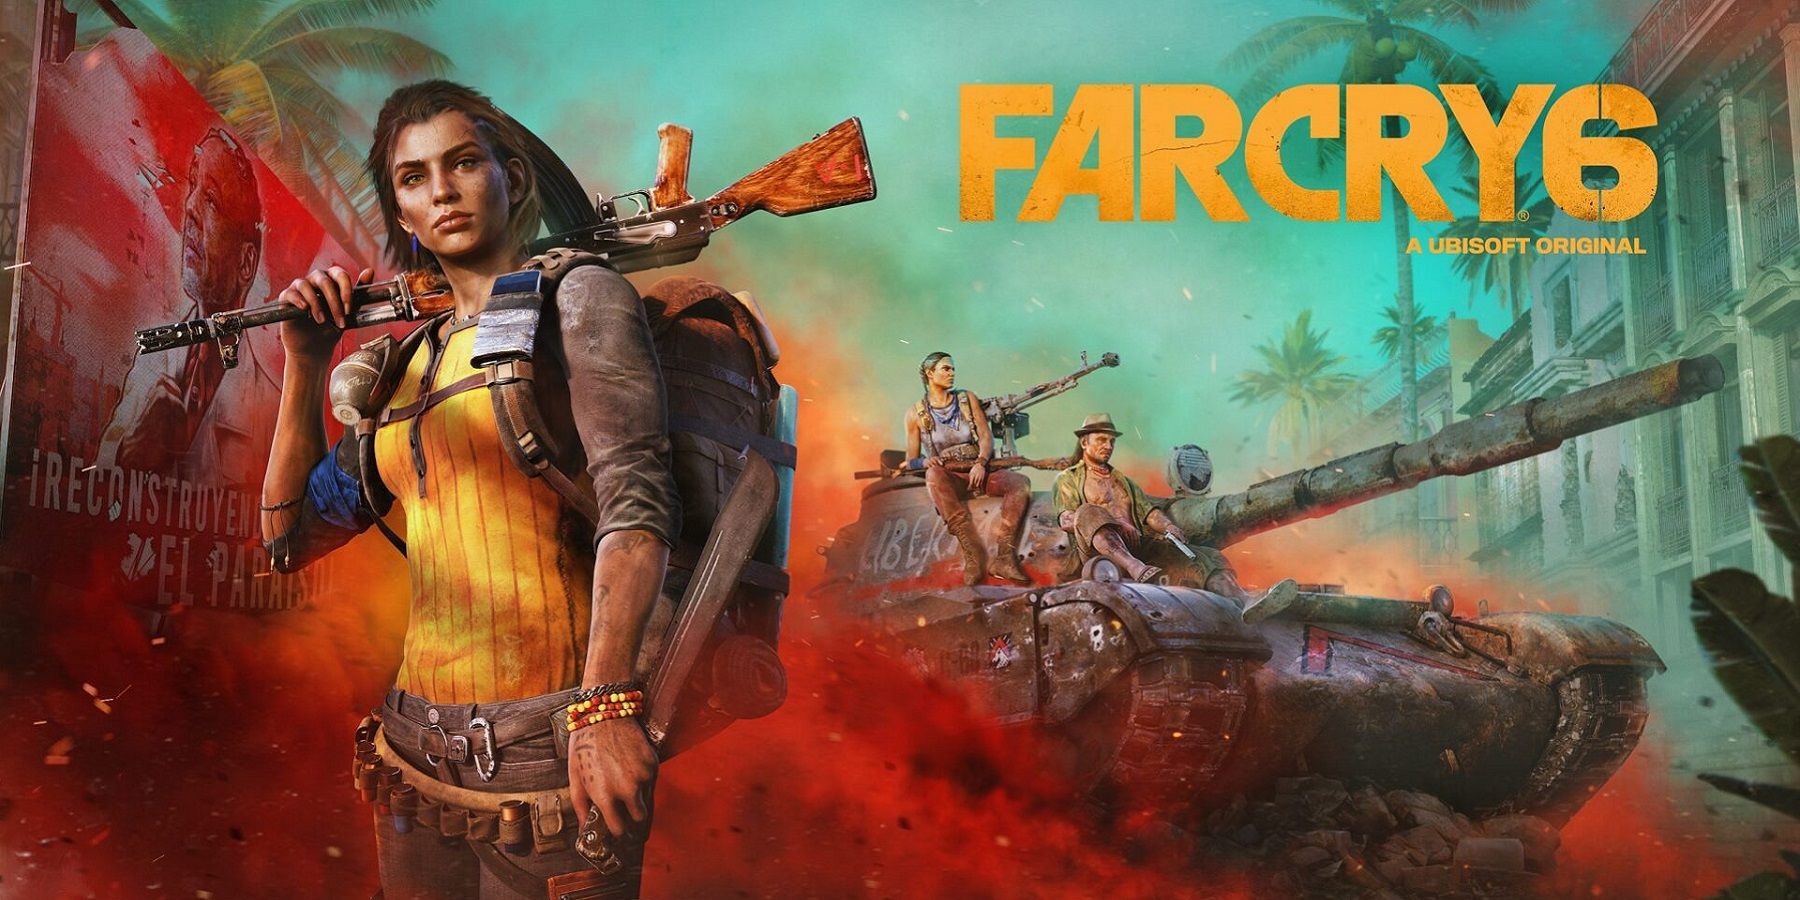 Image from Far Cry 6 showing Dani Rojas holding a rifle, with a tank in the background.